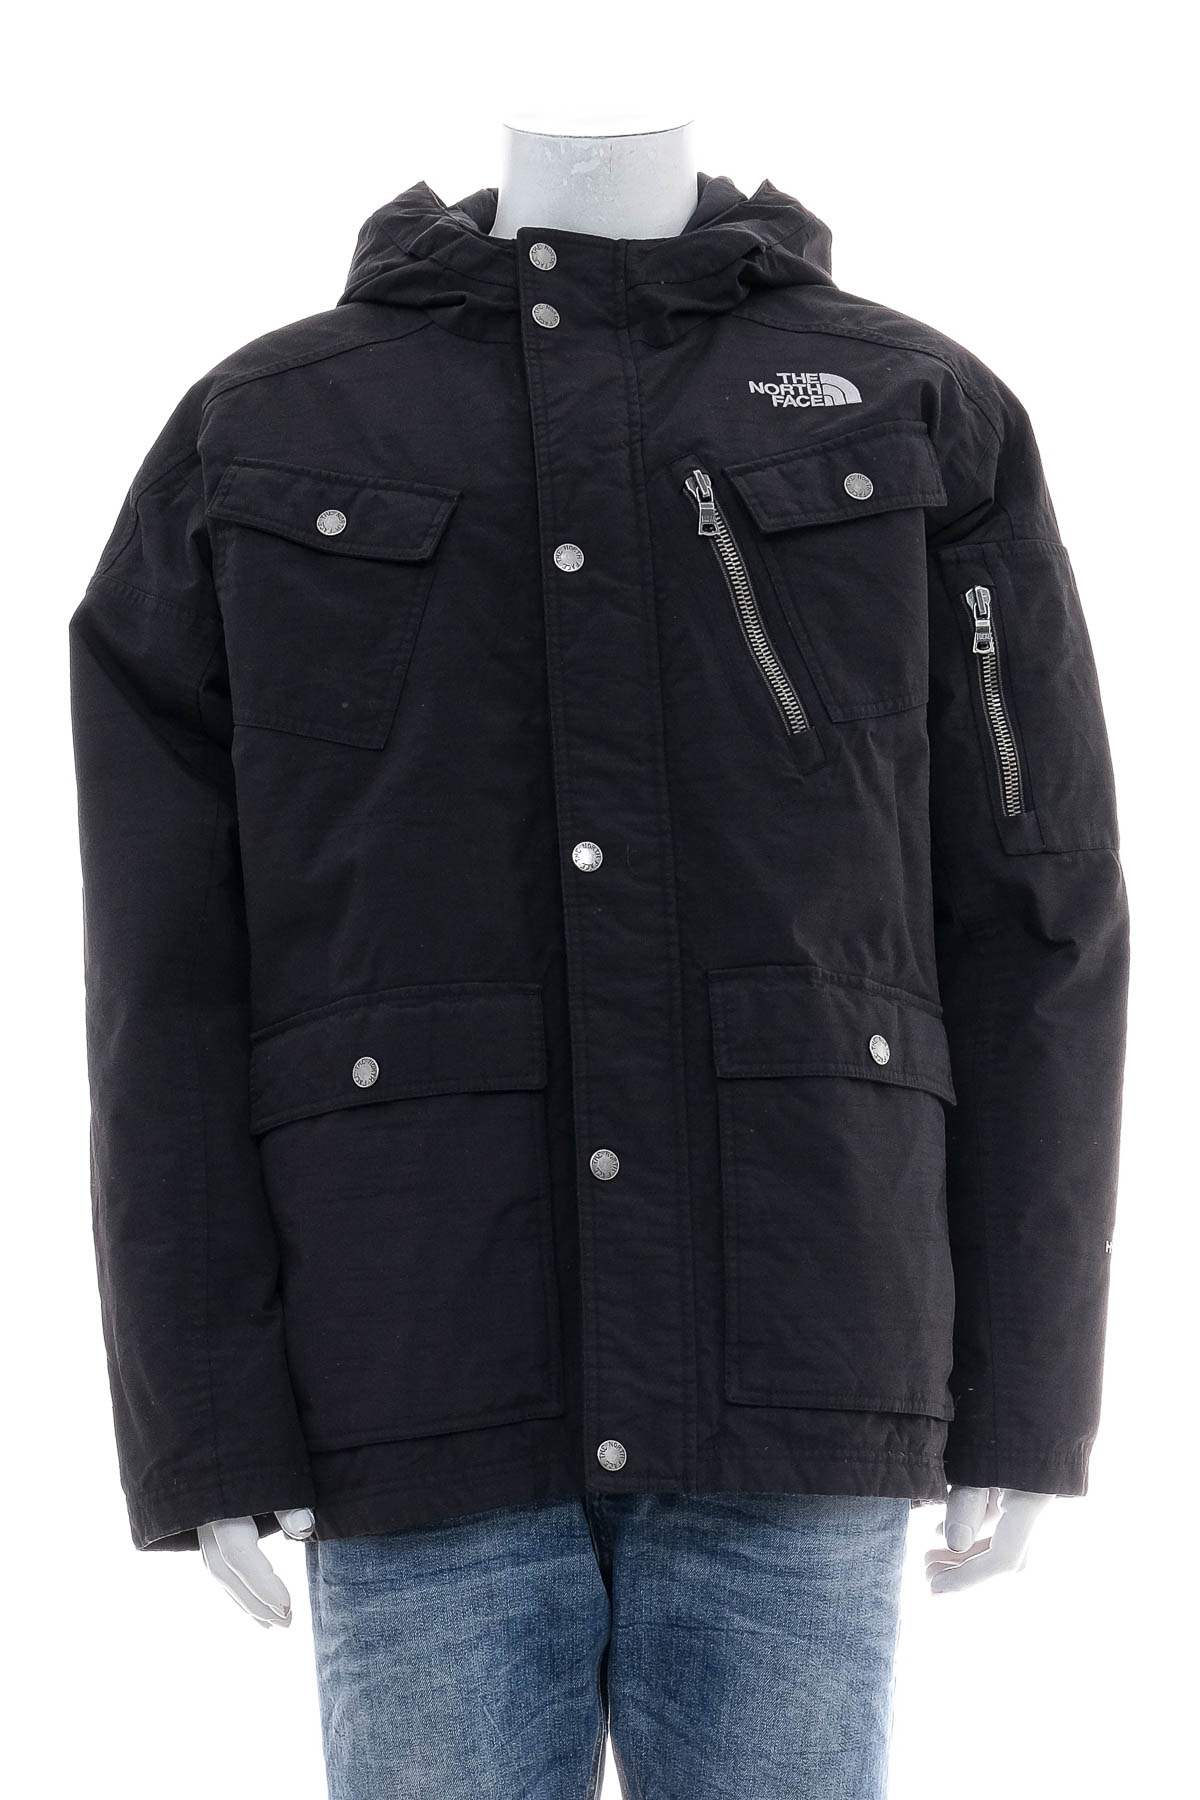 Men's jacket - The North Face - 0